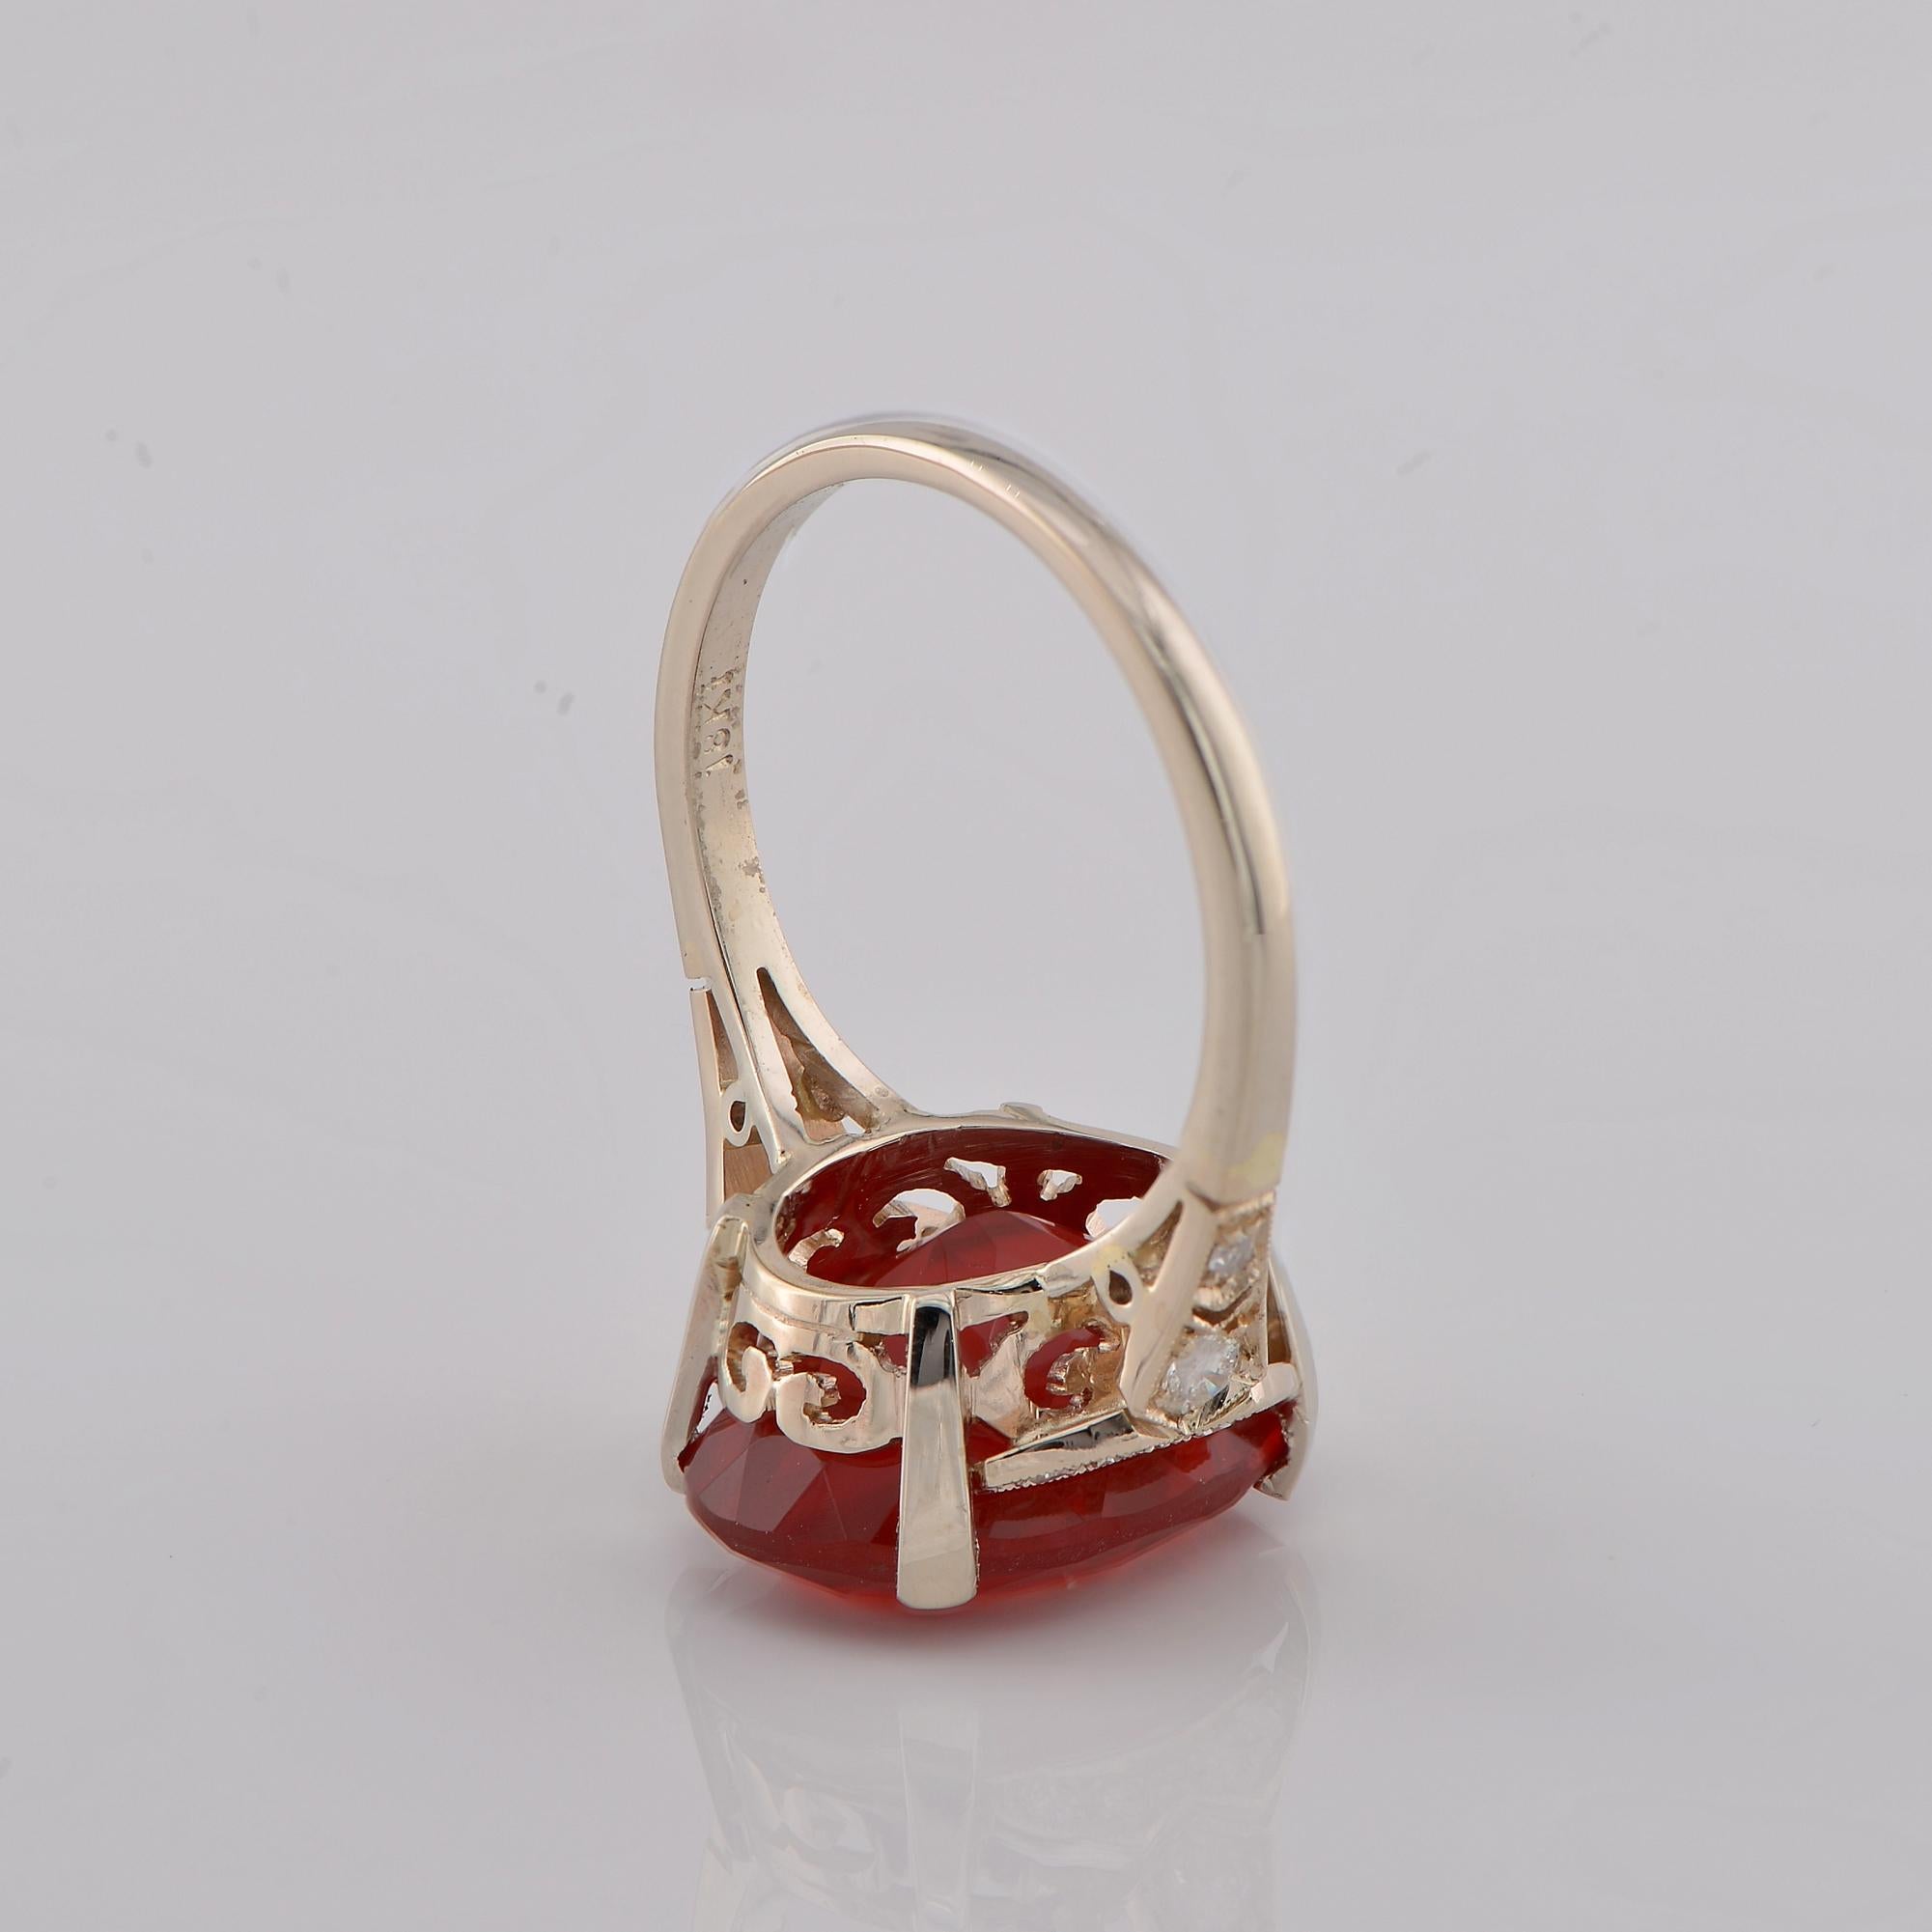 Vintage Style 6.0 Ct. Ruby Red Fire Opal Diamond Solitaire ring For Sale 1